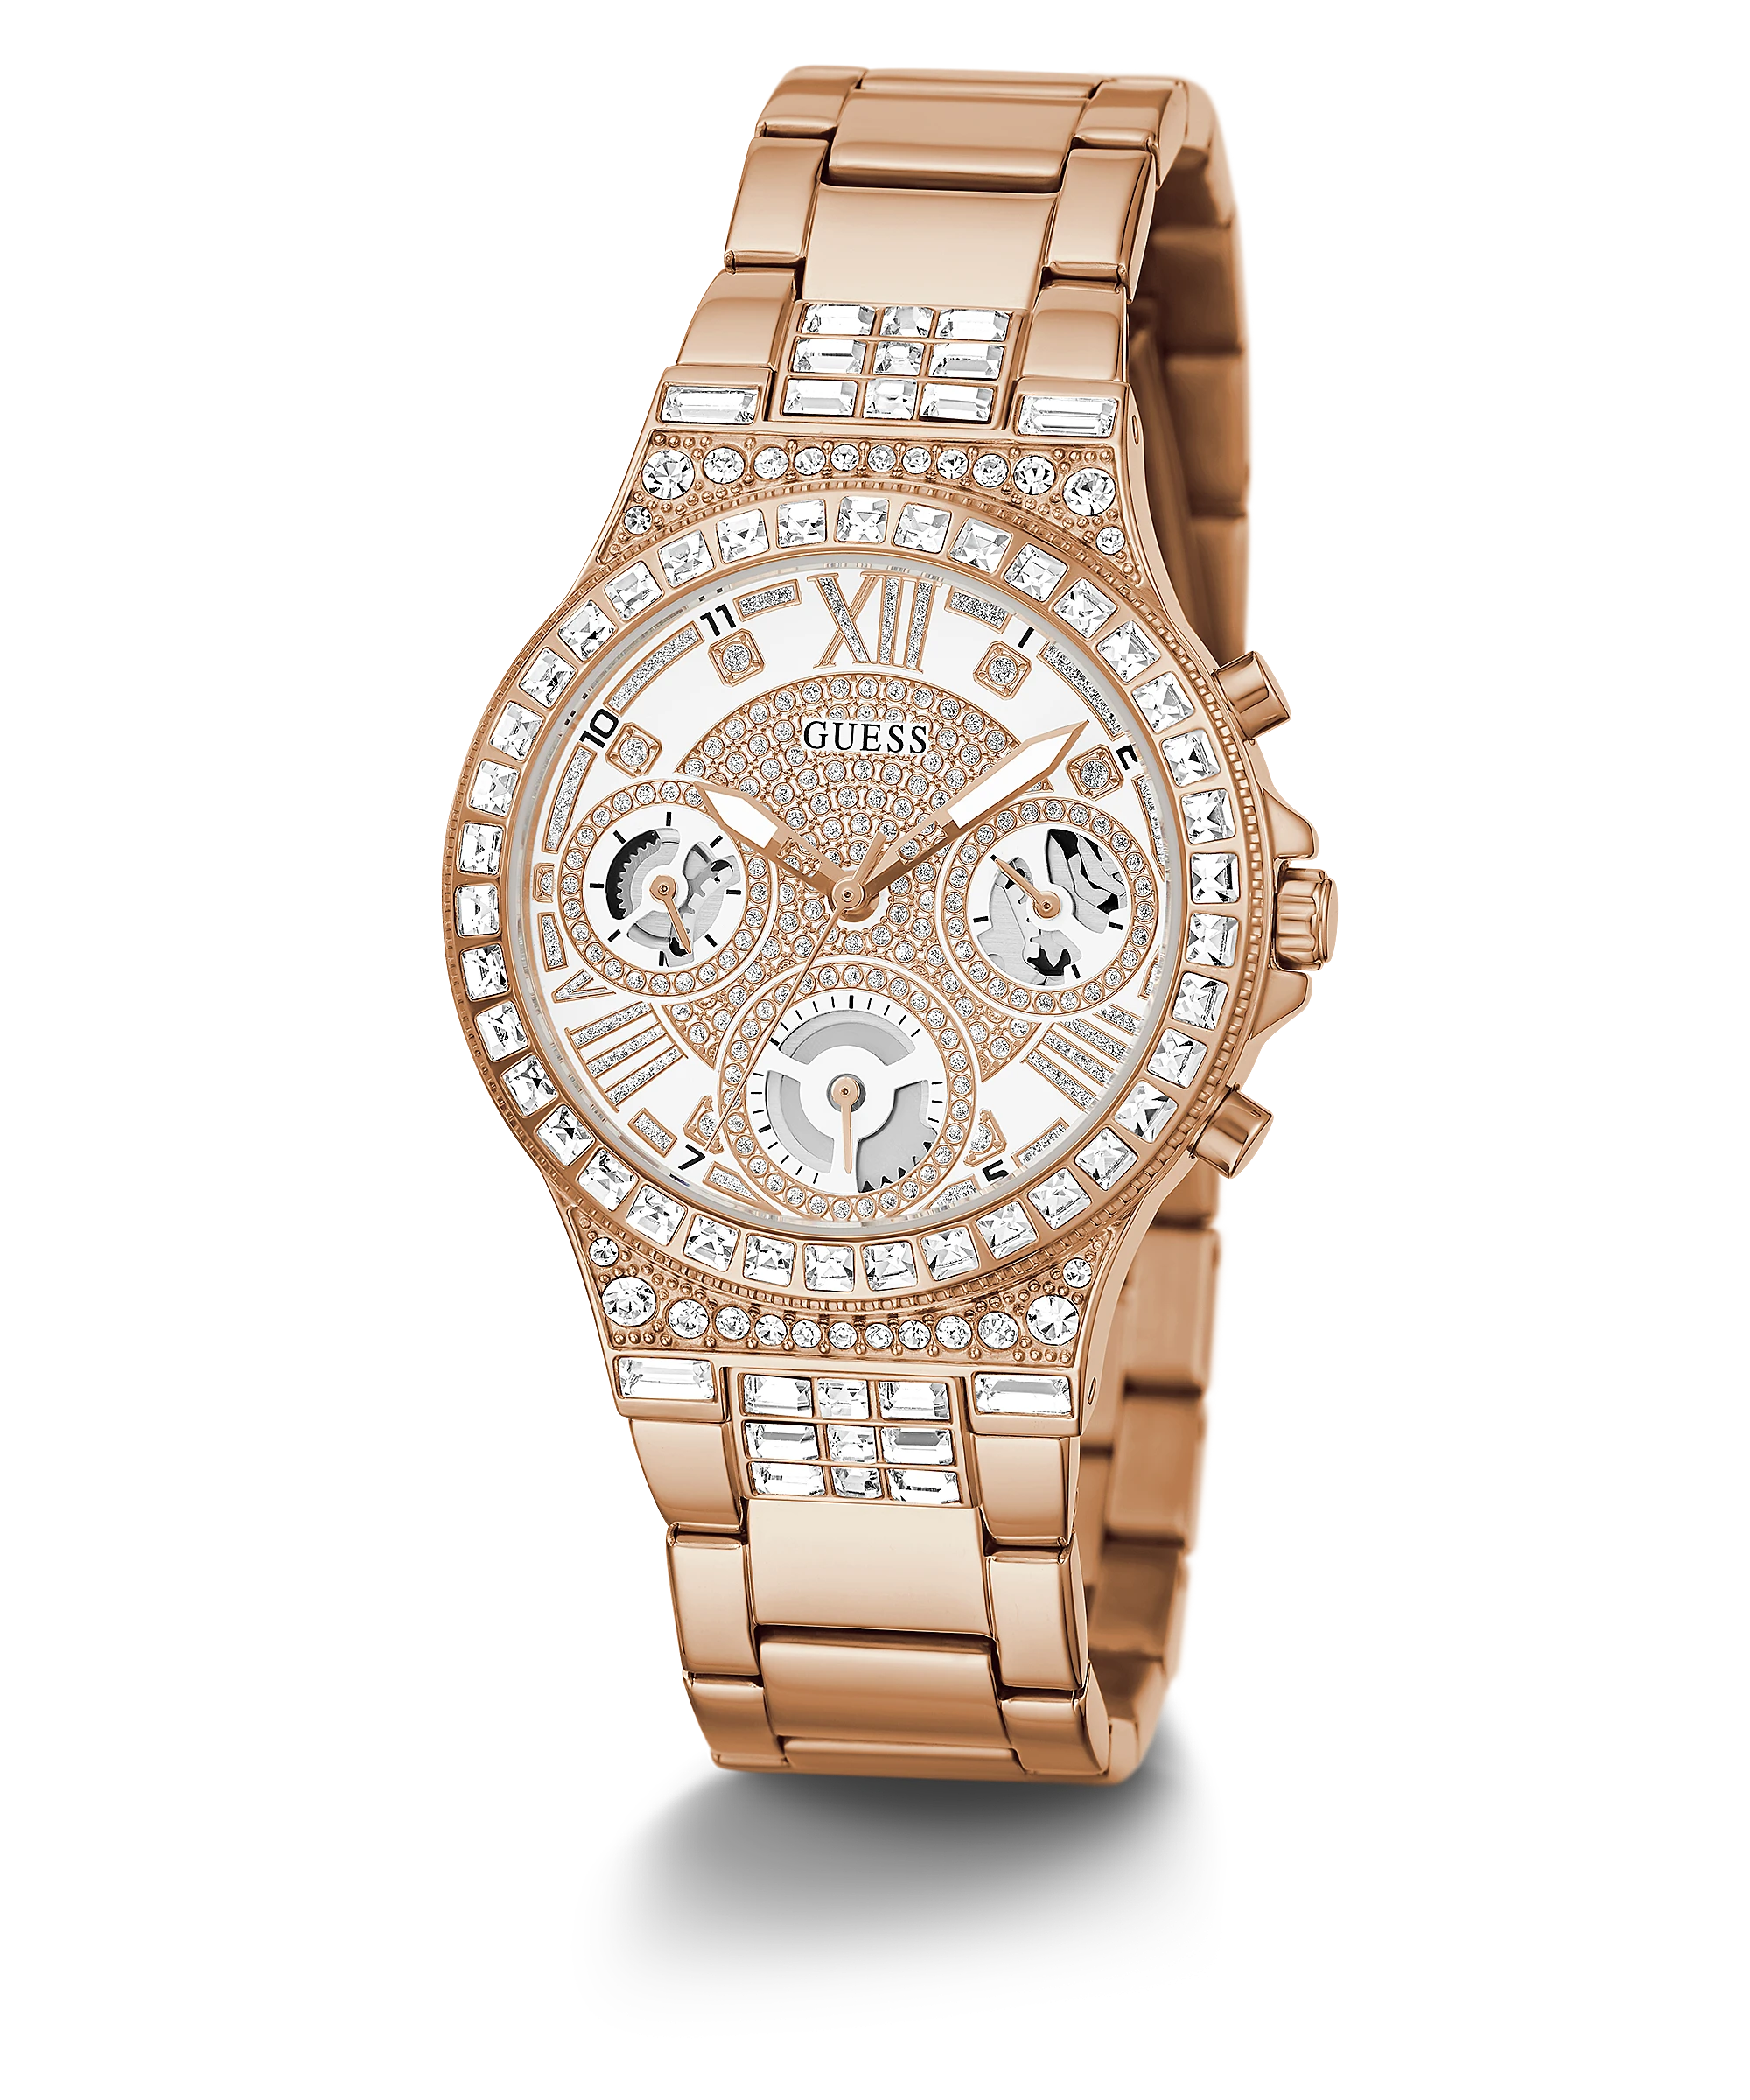 GUESS WATCH ROSE GOLD TONE CASE ROSE GOLD TONE STAINLESS STEEL WATCH